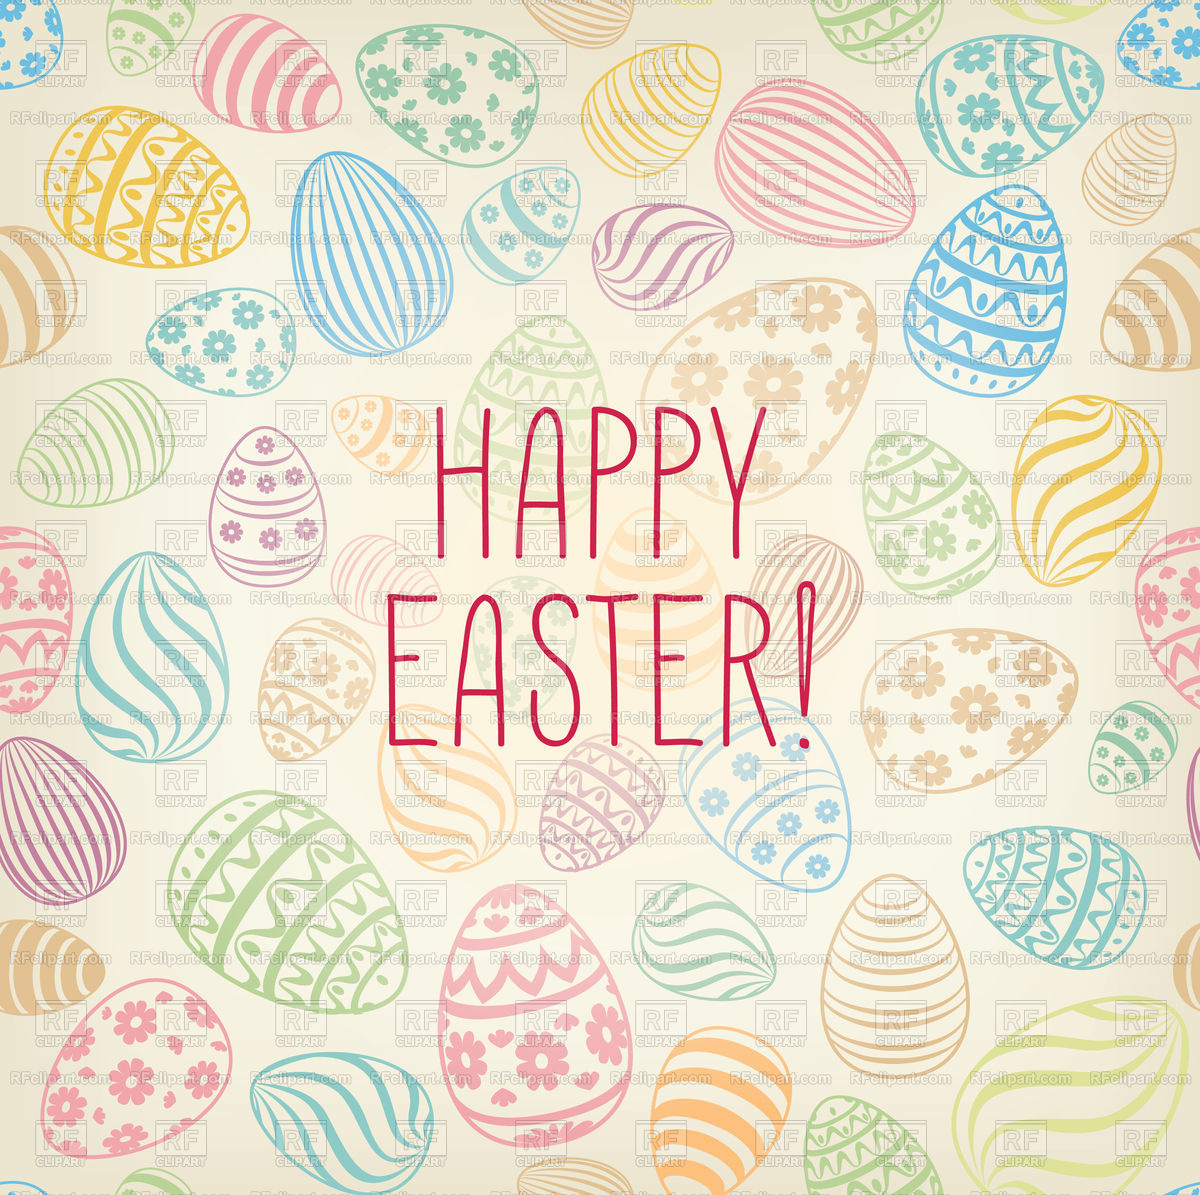 Happy Easter greeting card with eggs Vector Image of Backgrounds